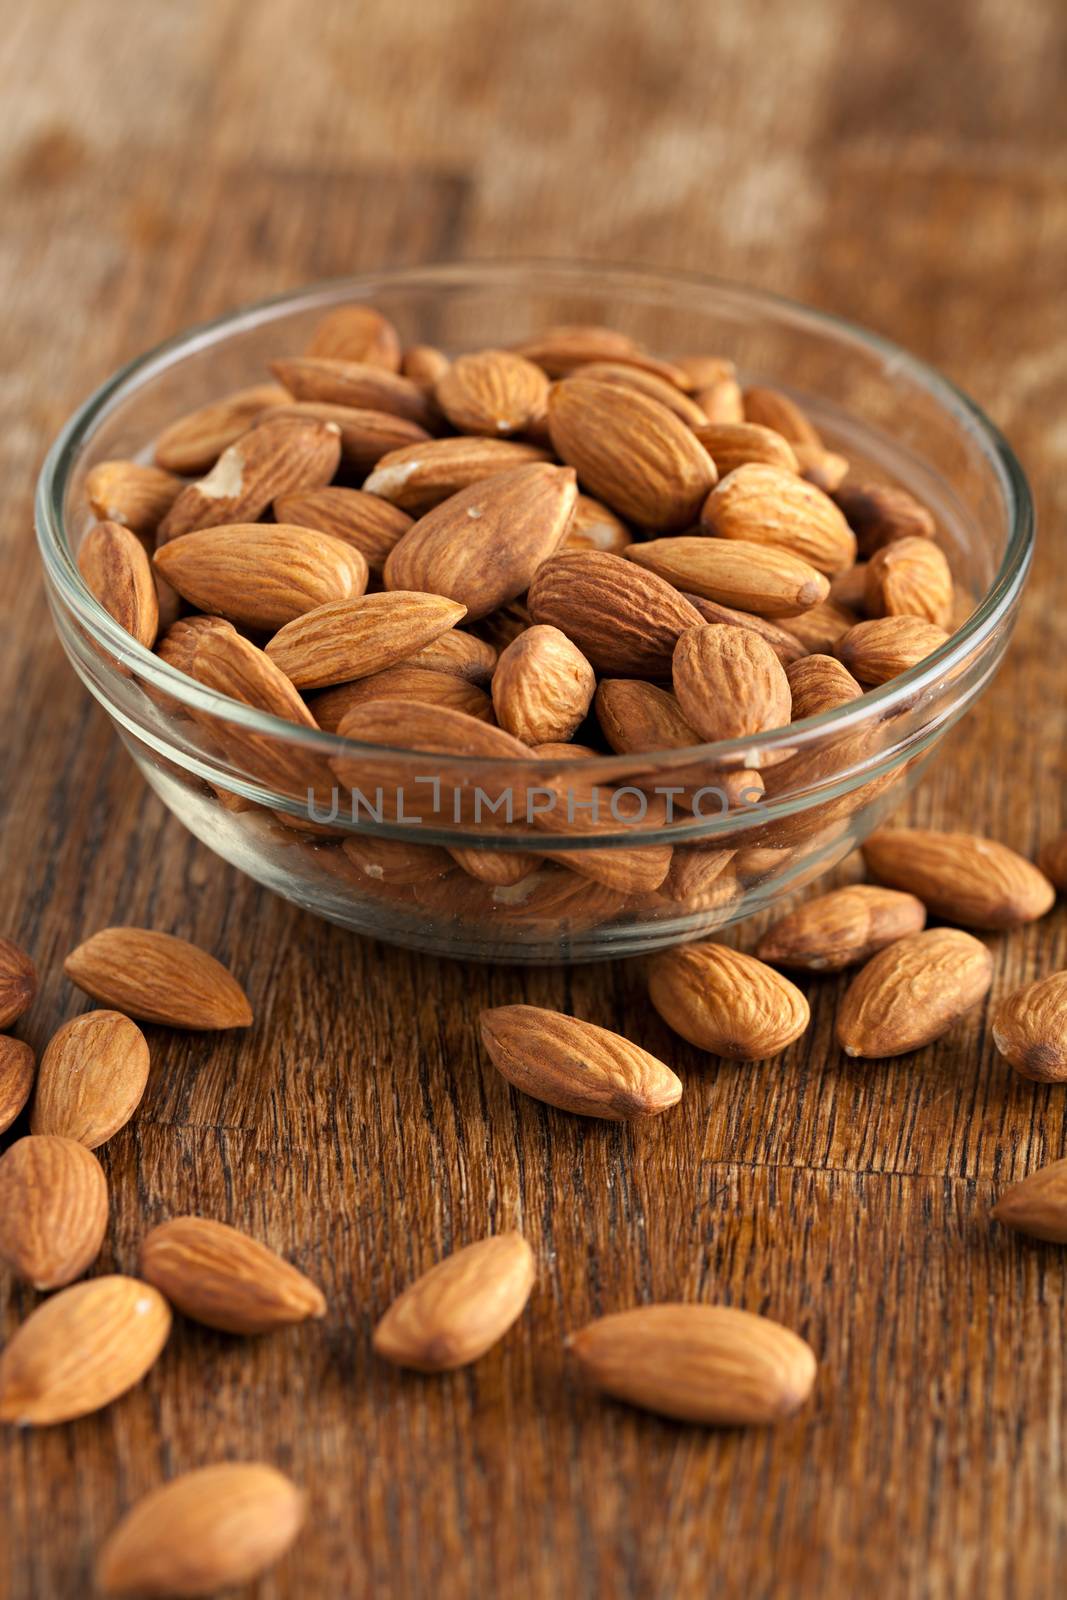 Organic almonds in raw form unroasted and unsalted.  Close up macro still life with a shallow depth of field.